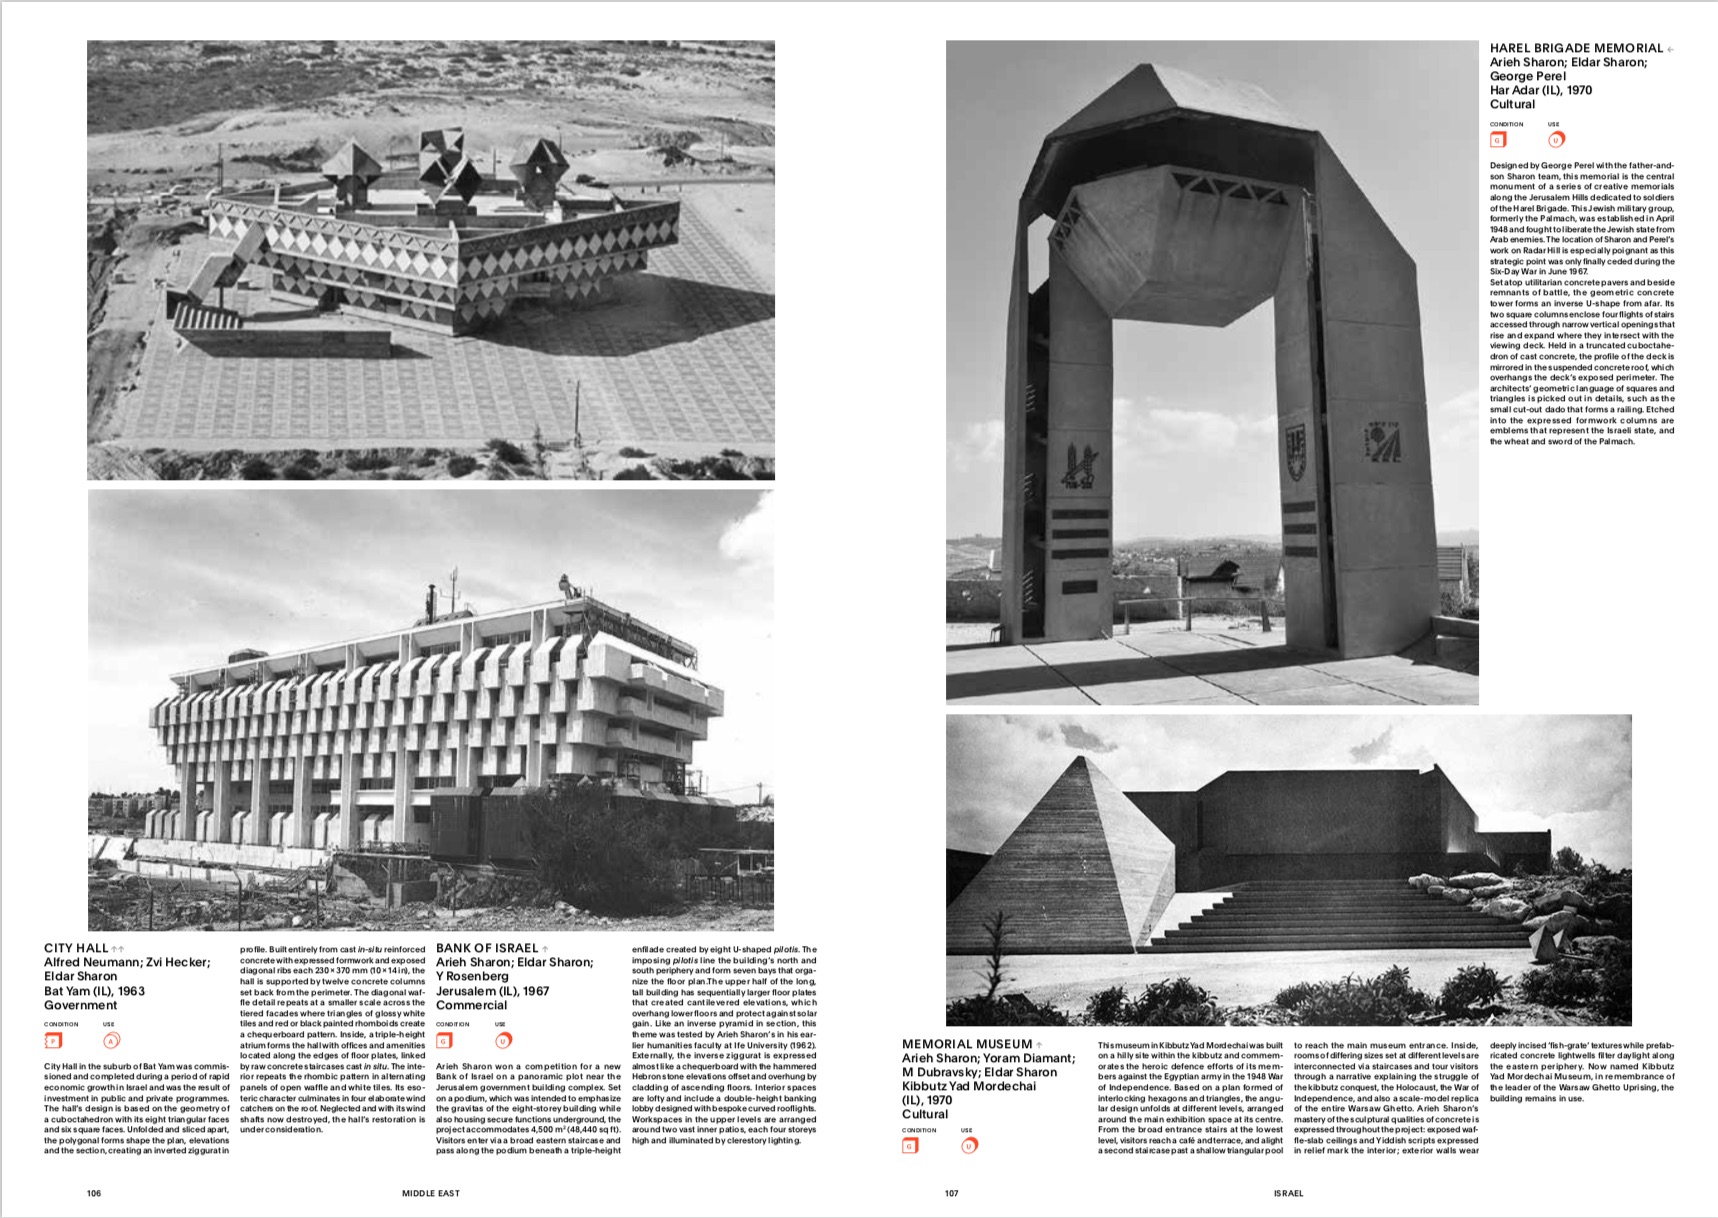 By The Editors of Phaidon Press from Atlas of Brutalist Architecture copyright Phaidon 2018